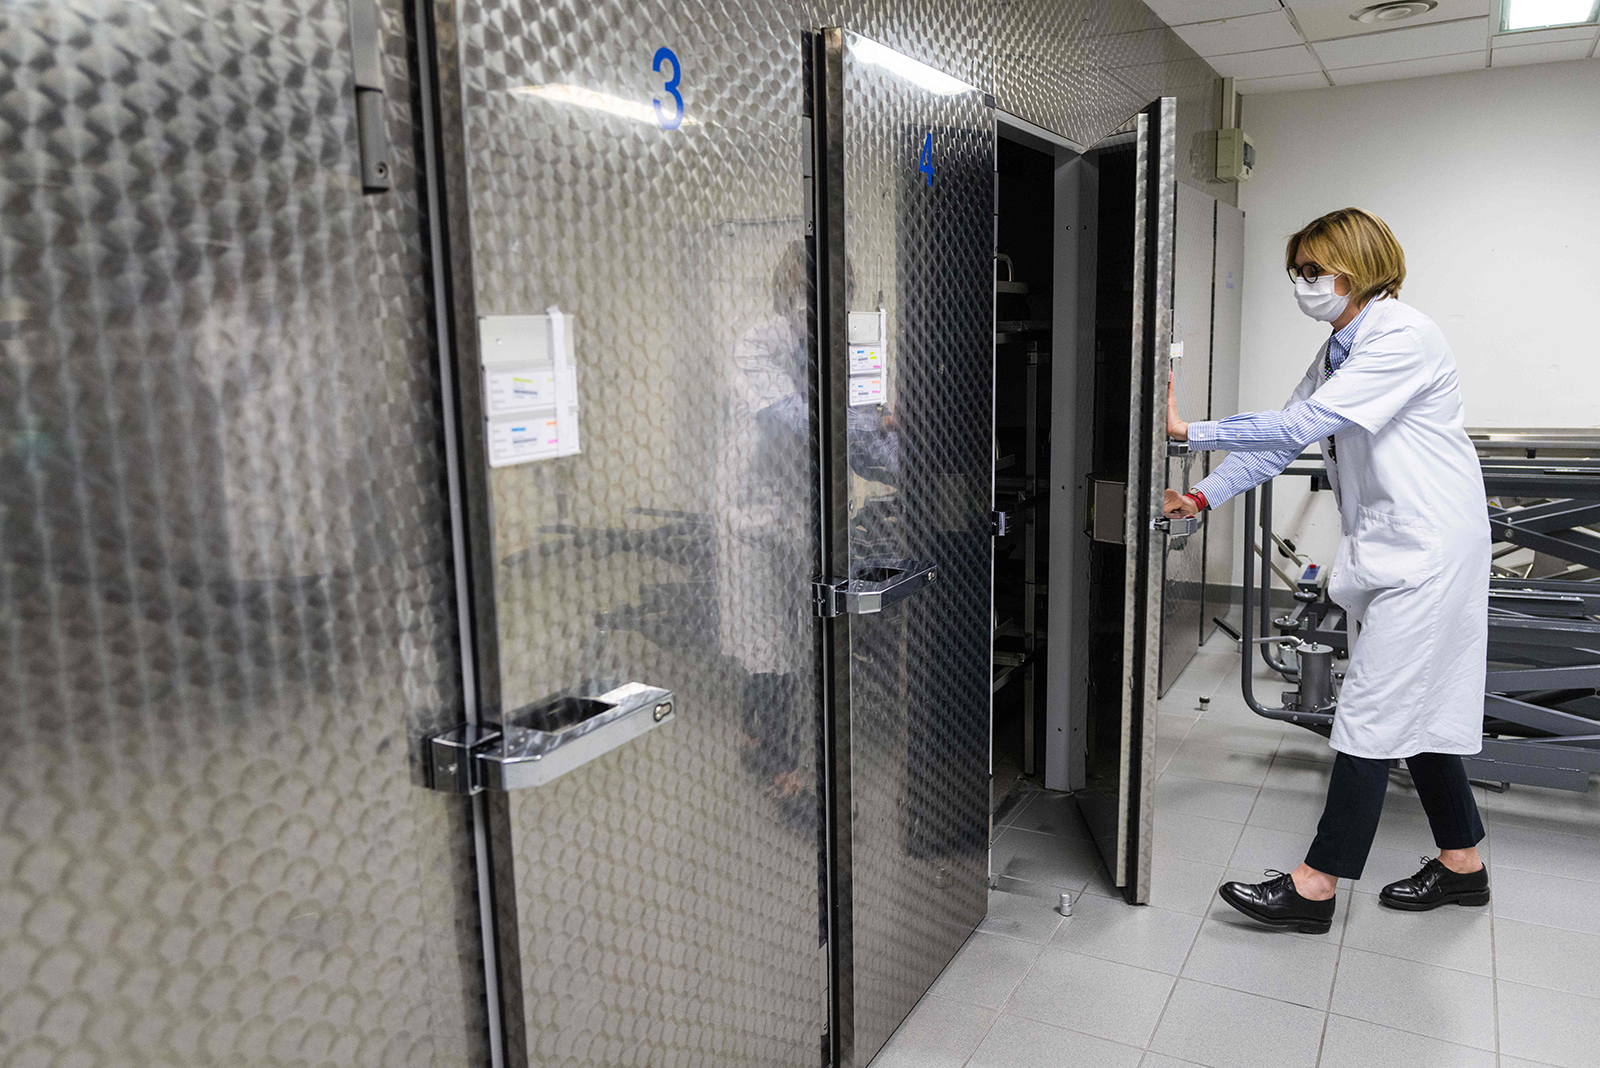 A mortuary service agent closes a refrigeration unit door at the Emile Muller hospital morgue on April 22, 2020, in Mulhouse, eastern France.